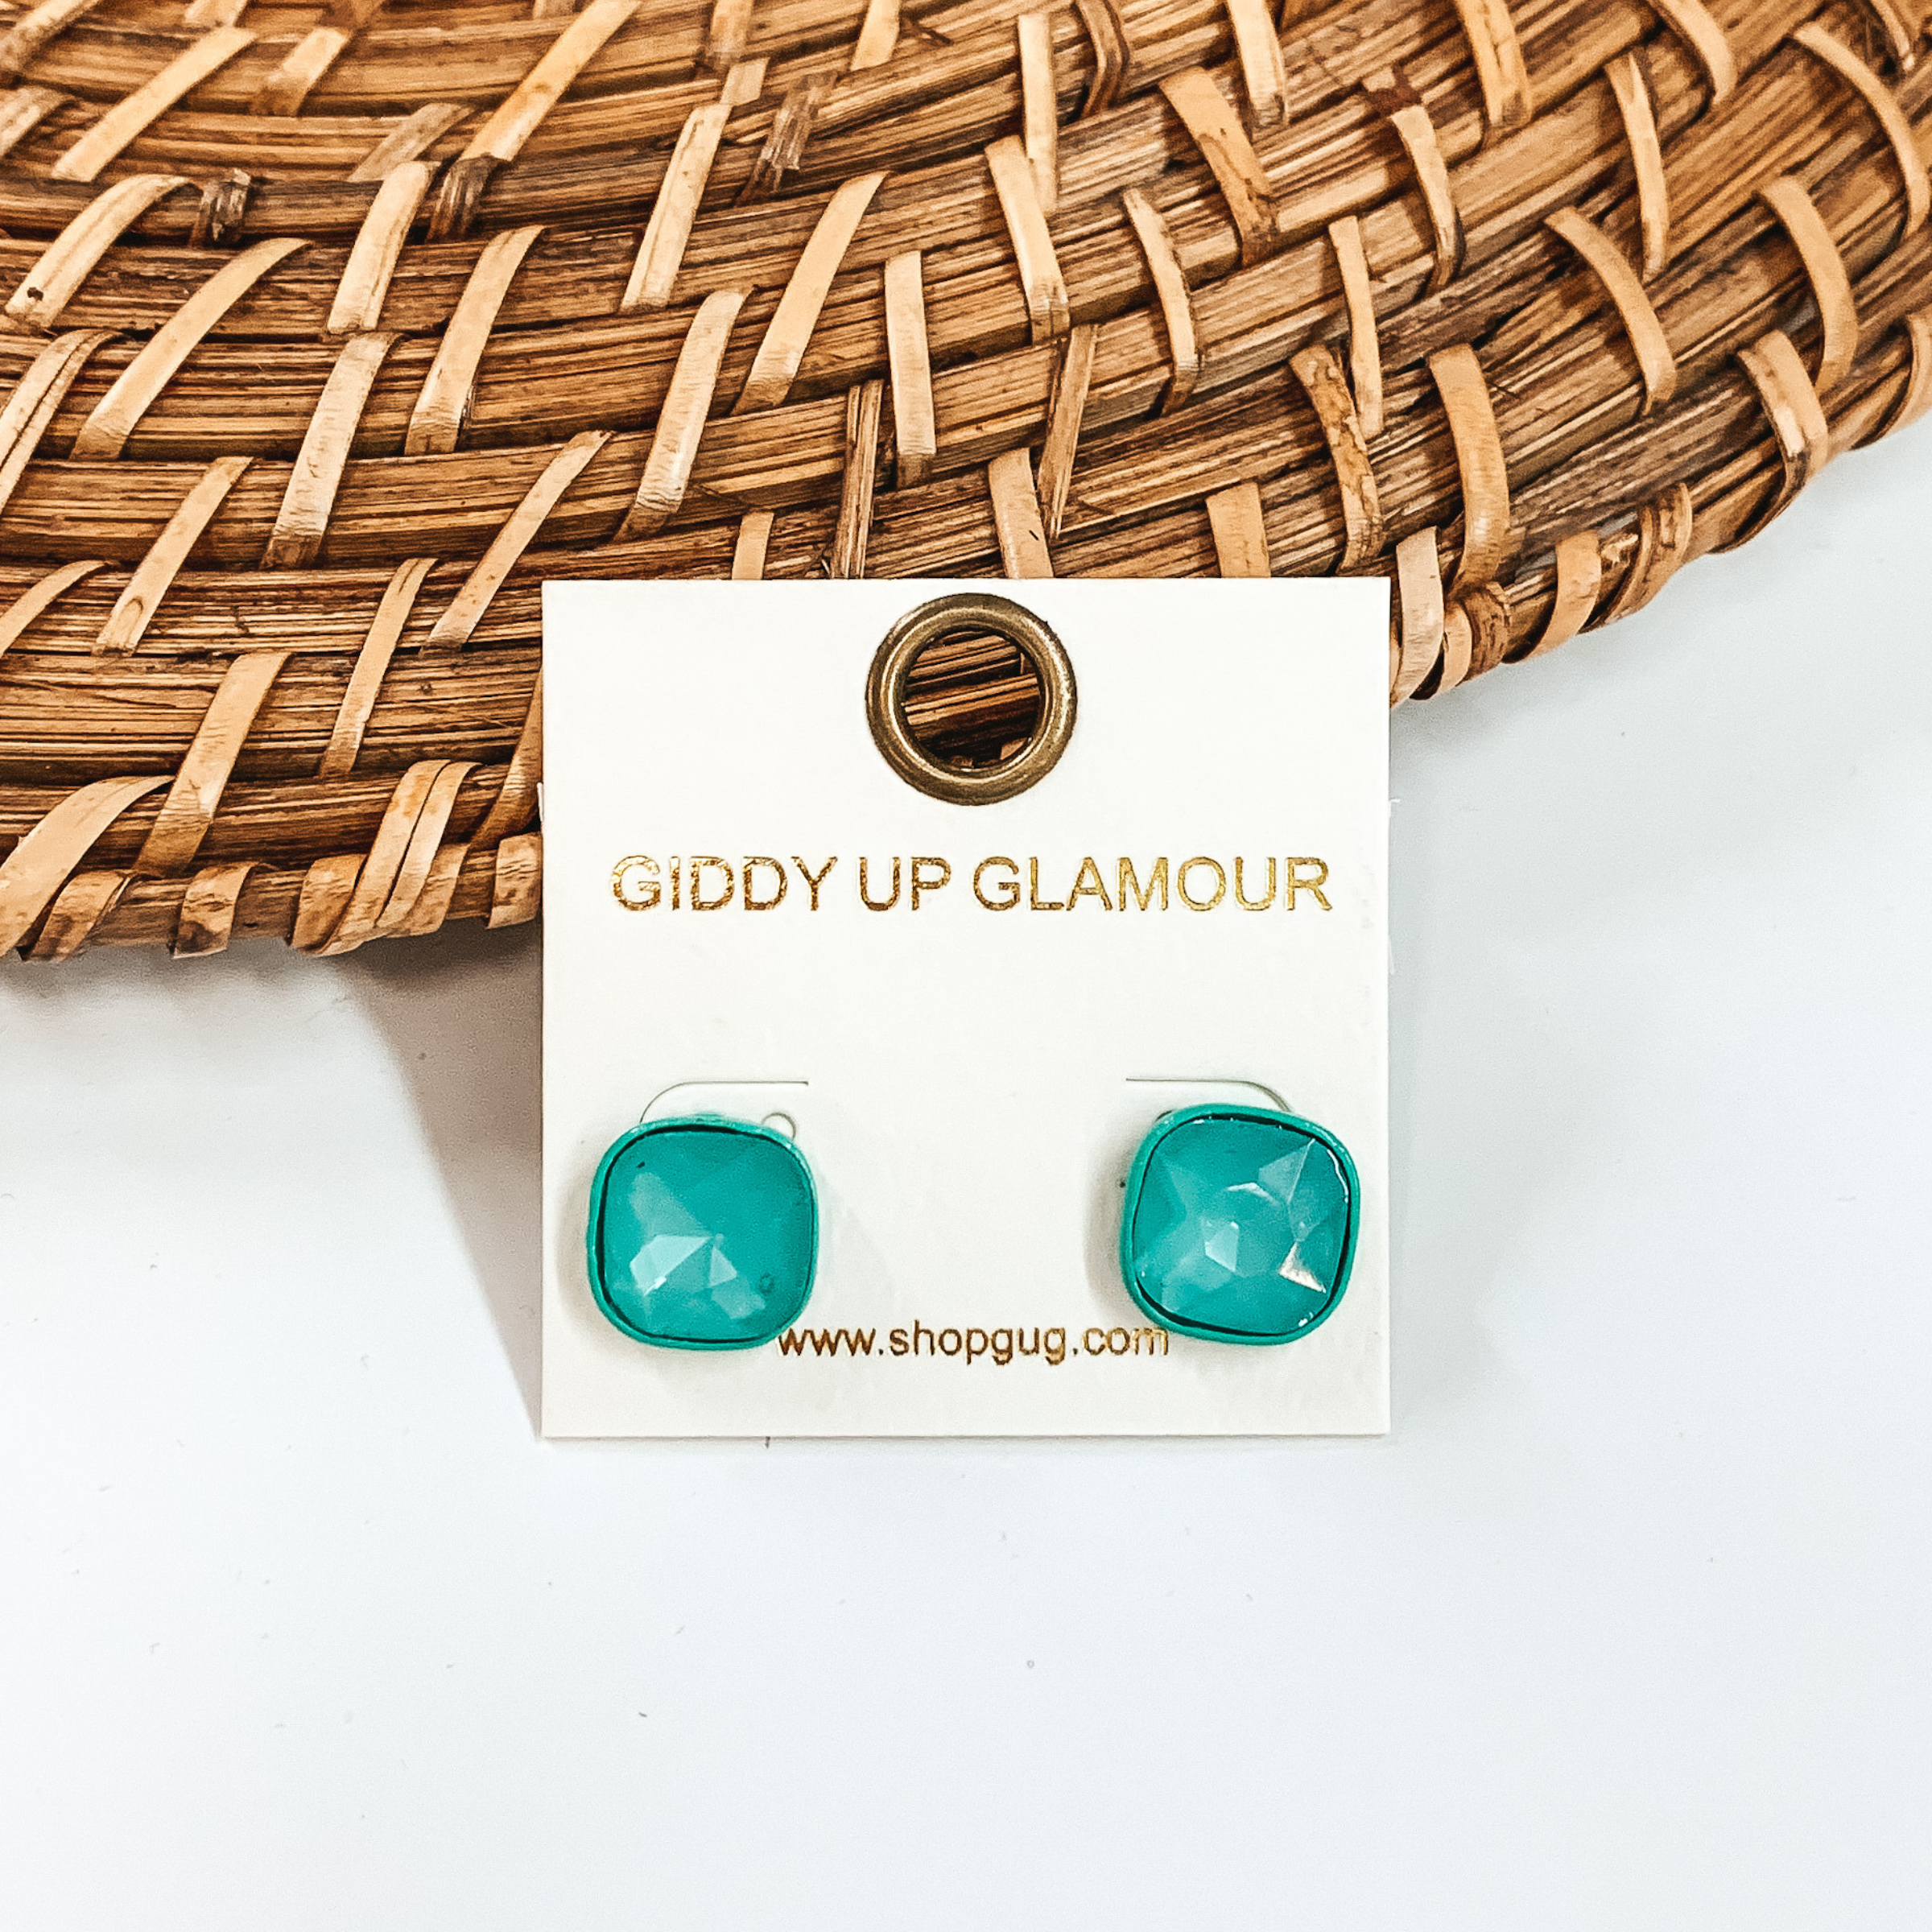 Turquoise, square stud earrings with turquoise colored crystals. These earrings are pictured on a white GUG earrings holder on a white background with brown basket weave material behind the earrings. 